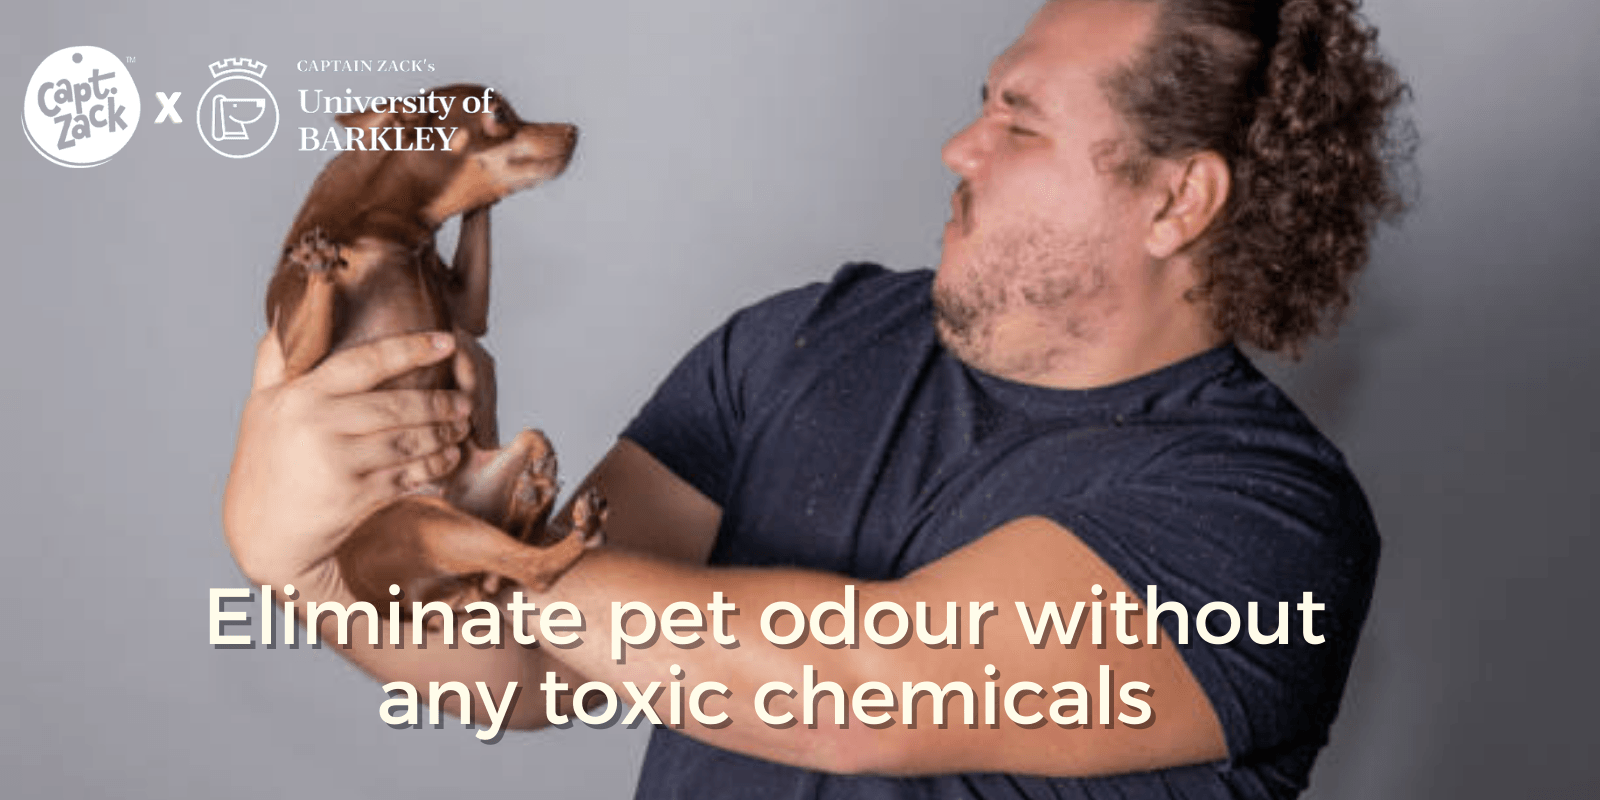 Eliminate pet odour without any toxic chemicals - Captain Zack